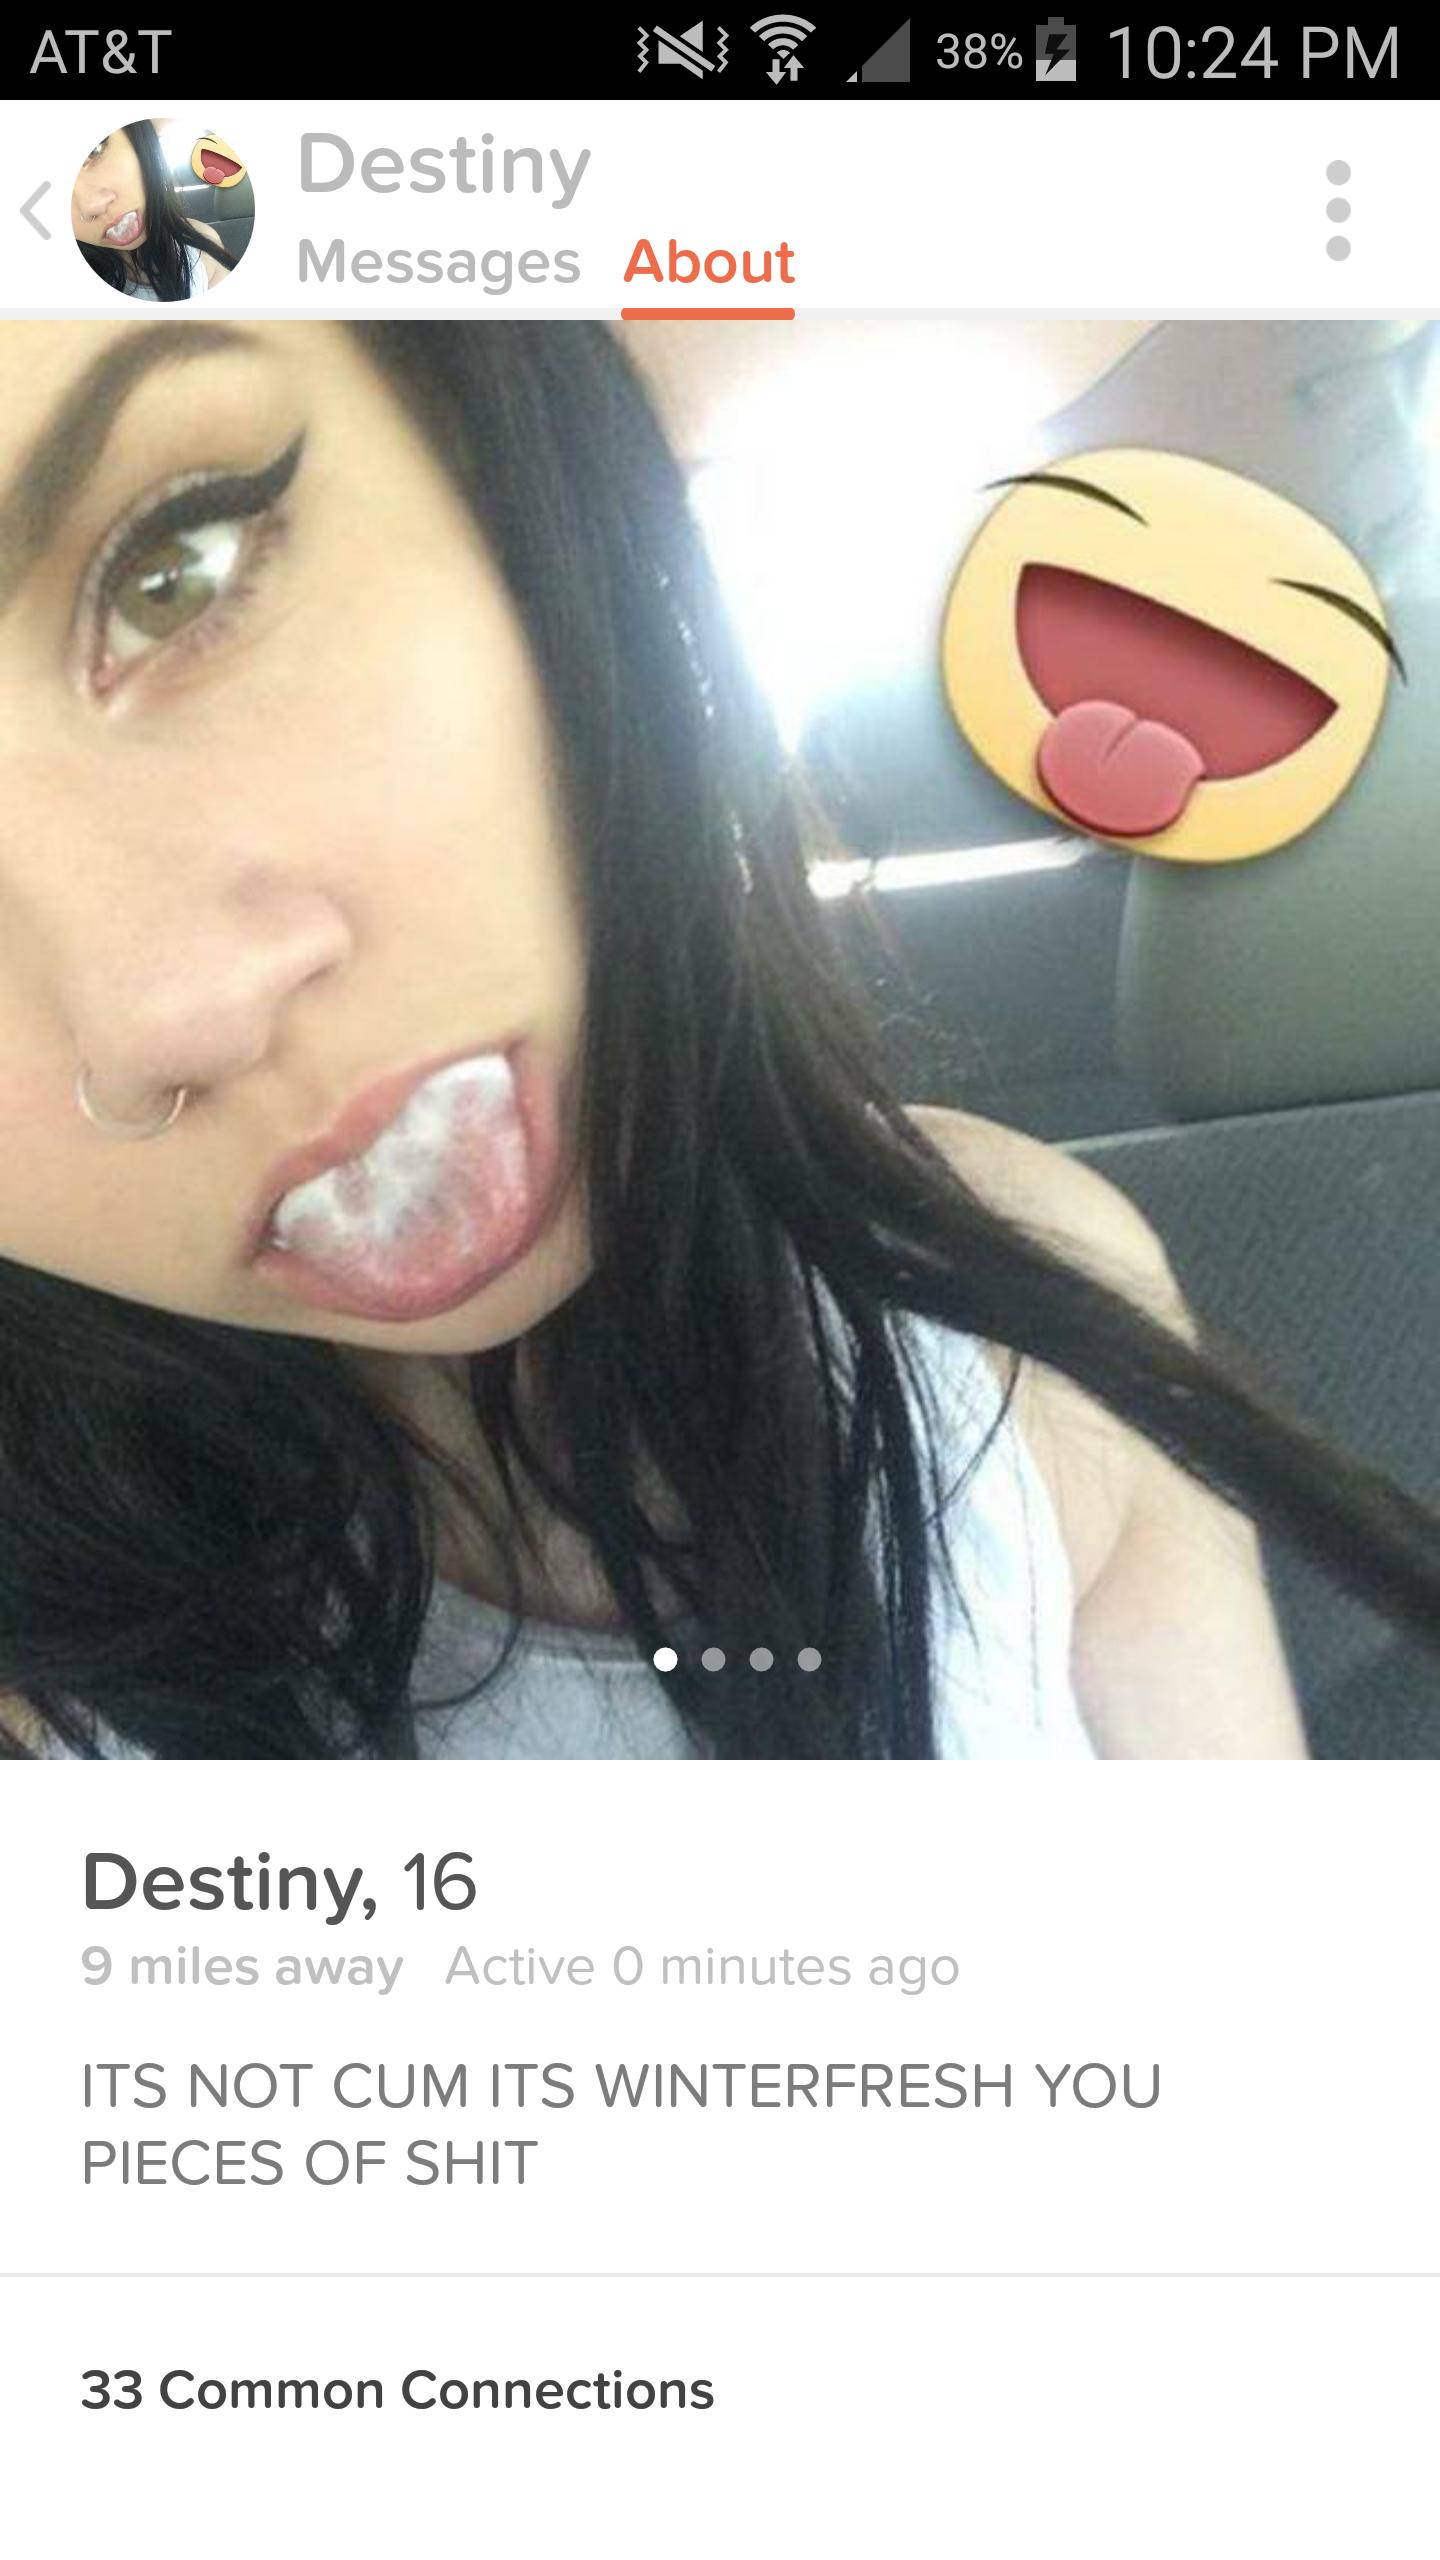 huge ass tinder - At&T 38% Z N Destiny Messages About Destiny, 16 9 miles away Active 0 minutes ago Its Not Cum Its Winterfresh You Pieces Of Shit 33 Common Connections